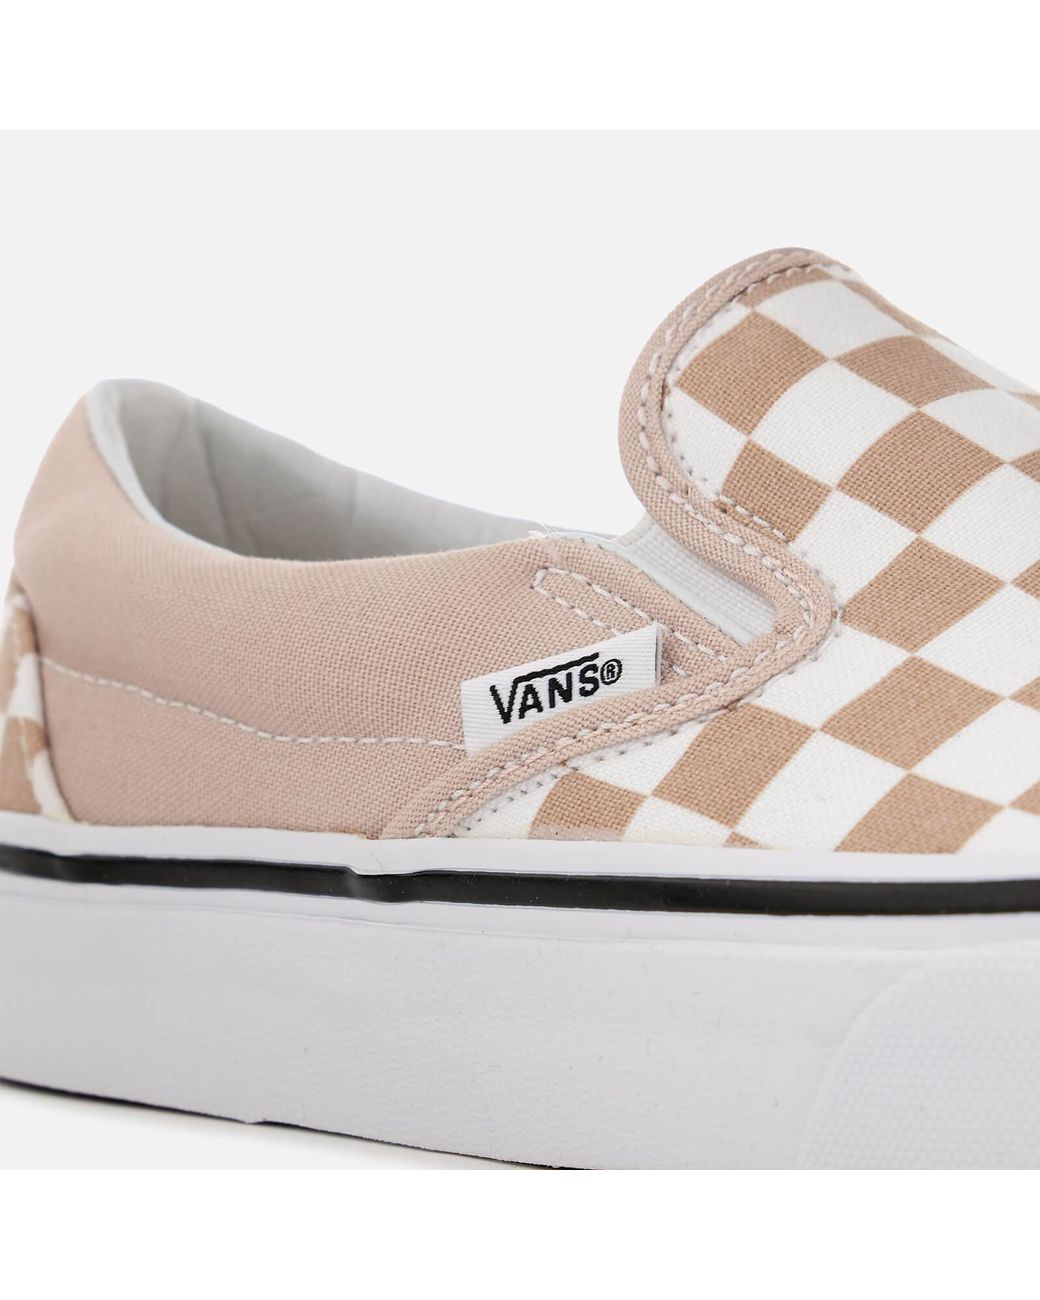 Vans Checkerboard Classic Slip-on Trainers in Nude (Natural) | Lyst